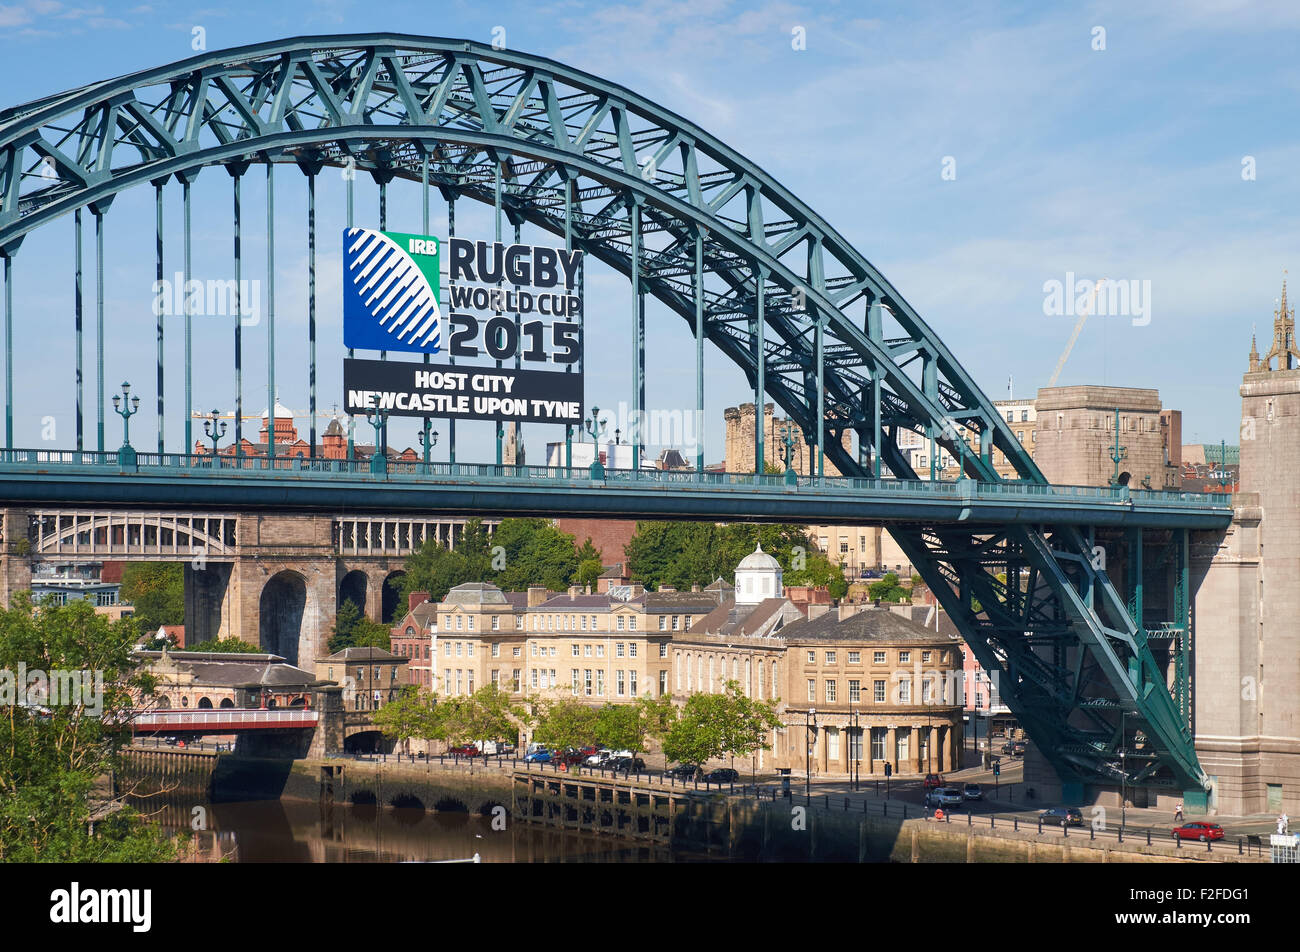 Rugby World Cup 2015 hosts sign on the Tyne Bridge, Newcastle Upon Tyne, UK. Stock Photo